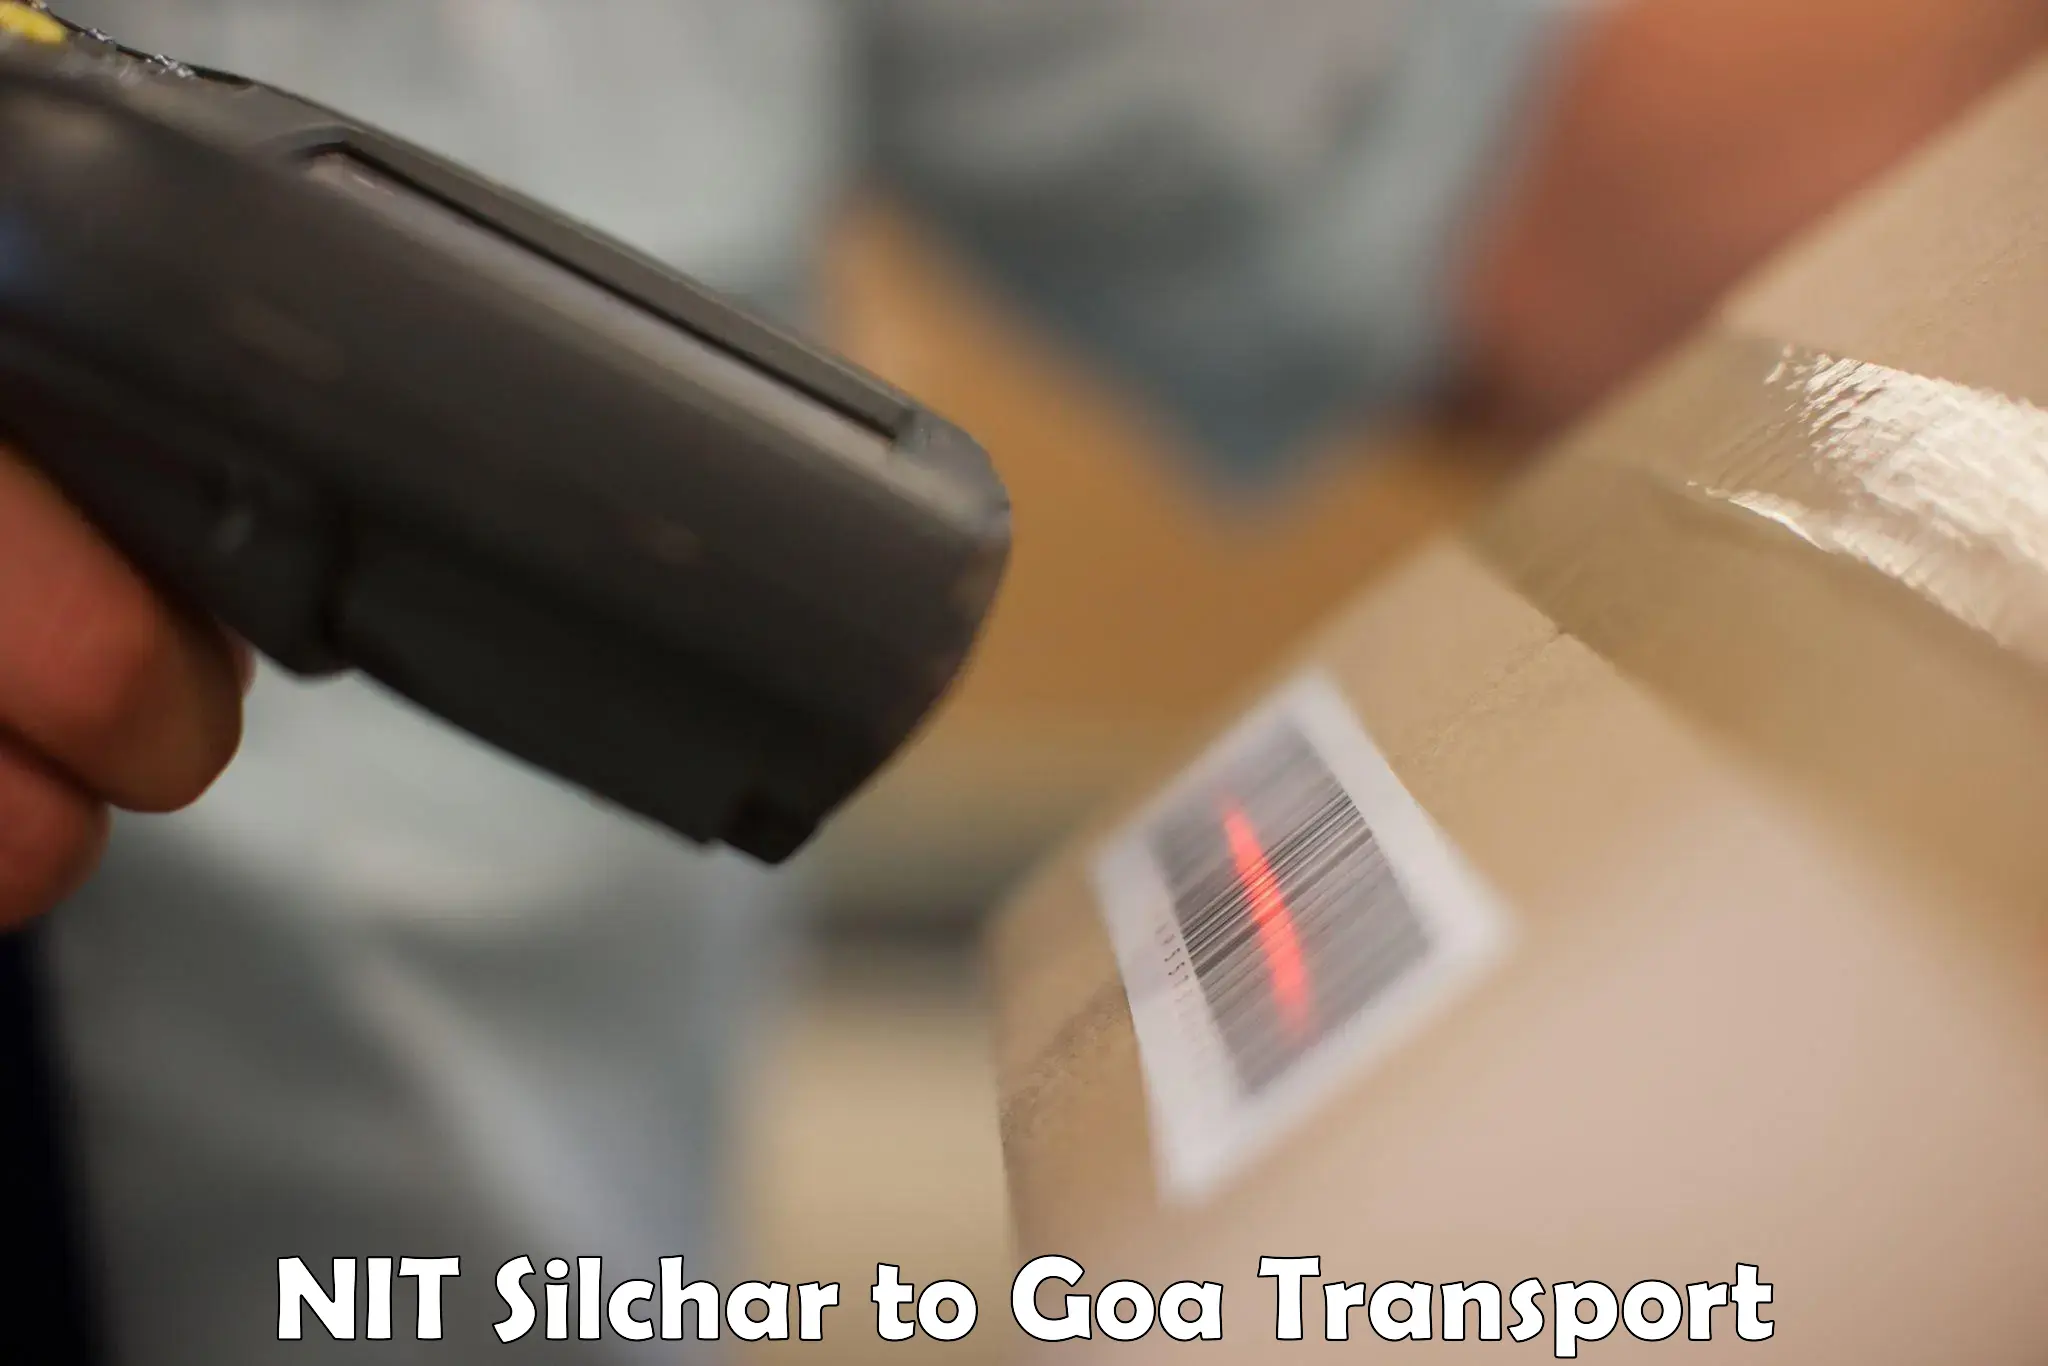 Cargo transport services NIT Silchar to NIT Goa